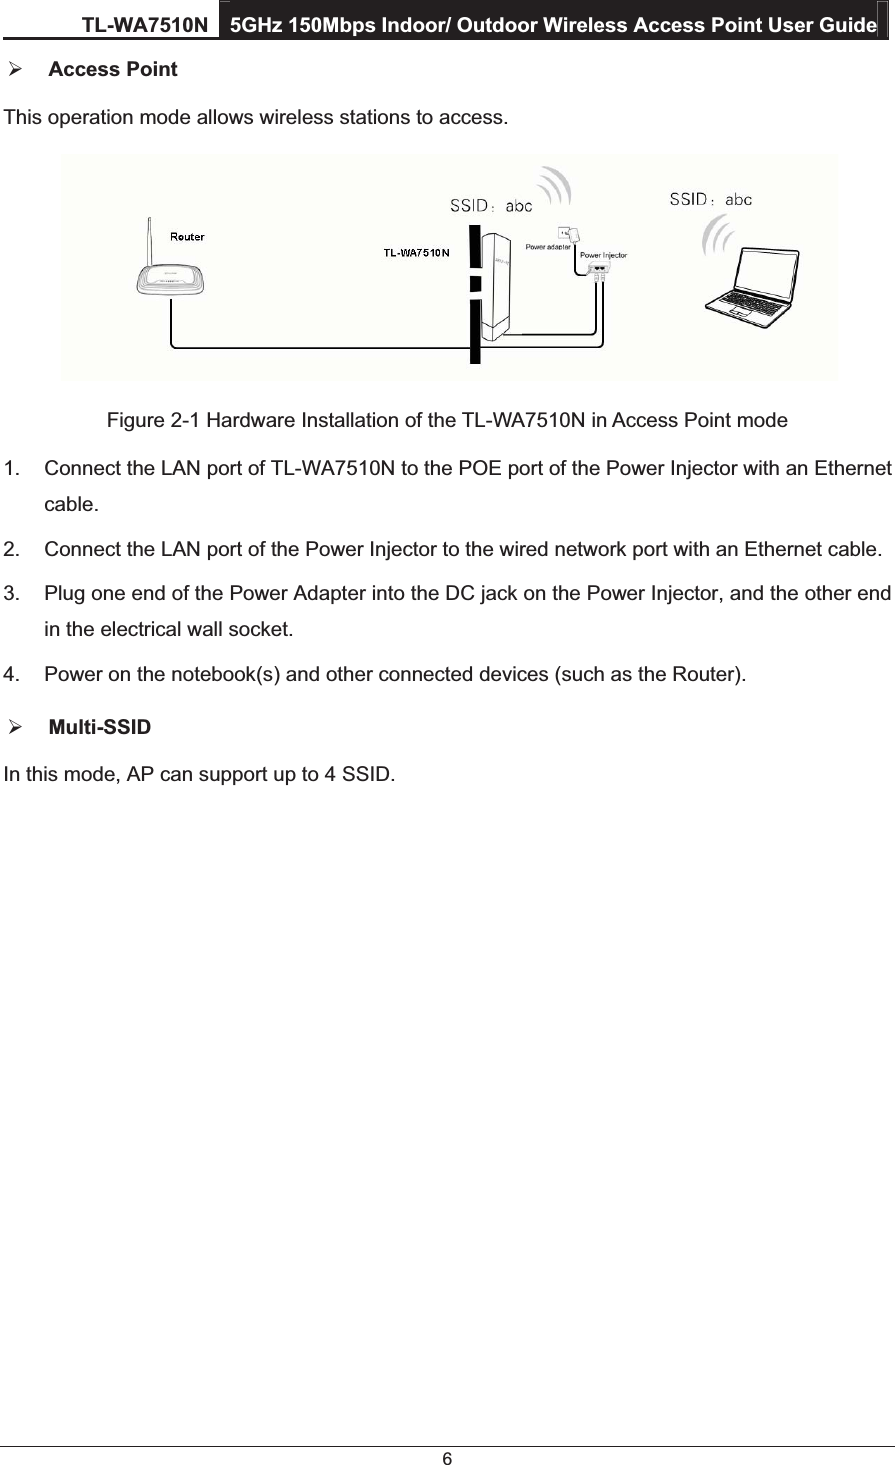 TL-WA7510N 5GHz 150Mbps Indoor/ Outdoor Wireless Access Point User Guide 6 ¾ Access Point This operation mode allows wireless stations to access.  Figure 2-1 Hardware Installation of the TL-WA7510N in Access Point mode 1.  Connect the LAN port of TL-WA7510N to the POE port of the Power Injector with an Ethernet cable. 2.  Connect the LAN port of the Power Injector to the wired network port with an Ethernet cable. 3.  Plug one end of the Power Adapter into the DC jack on the Power Injector, and the other end in the electrical wall socket. 4.  Power on the notebook(s) and other connected devices (such as the Router). ¾ Multi-SSID  In this mode, AP can support up to 4 SSID. 